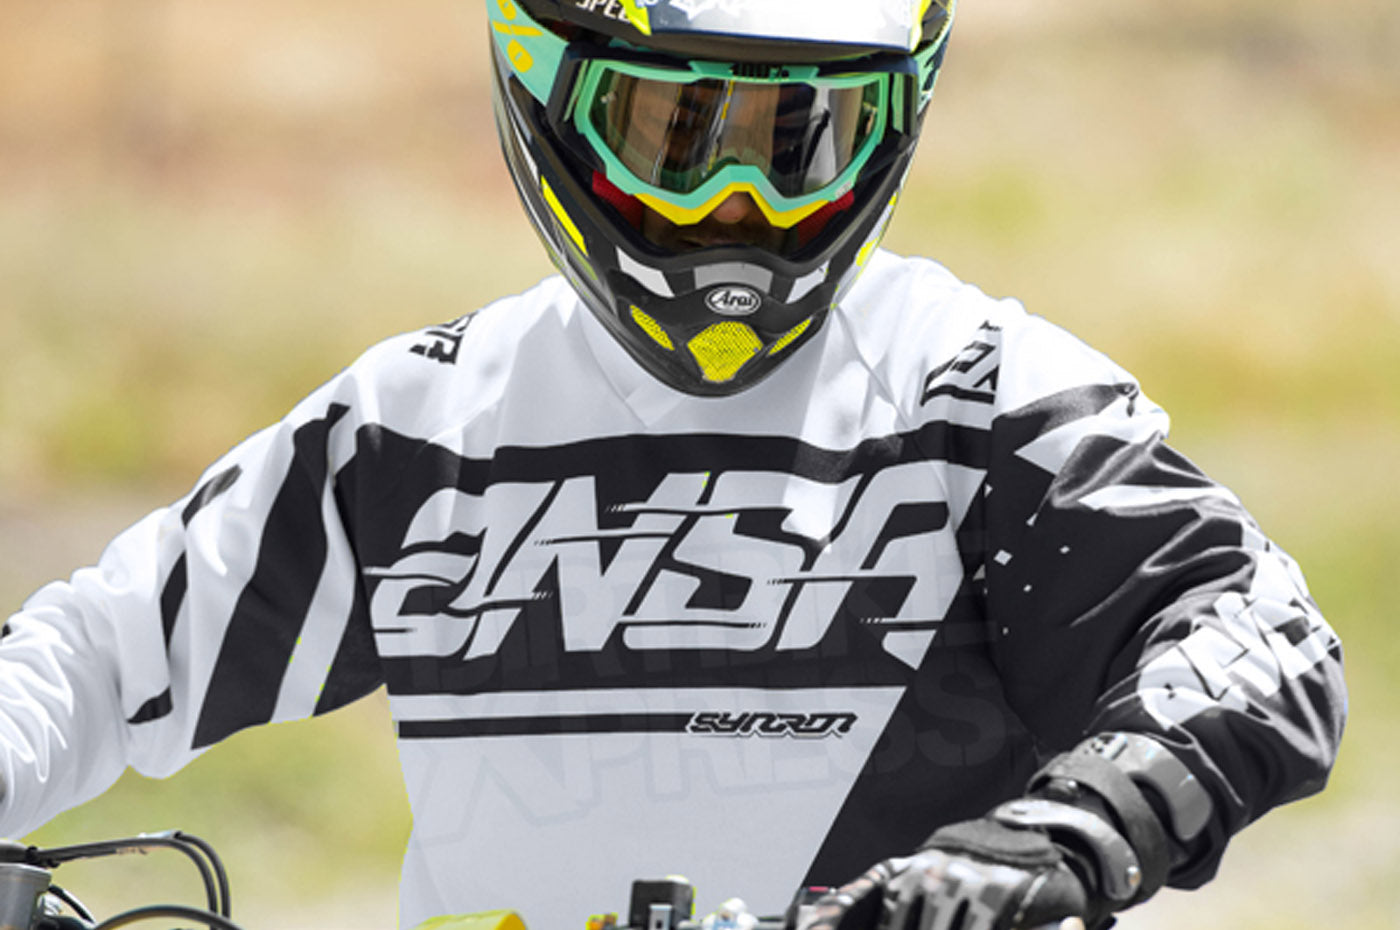 Answer Racing MX 2018 Presents Syncron Motorcycle Race Gear